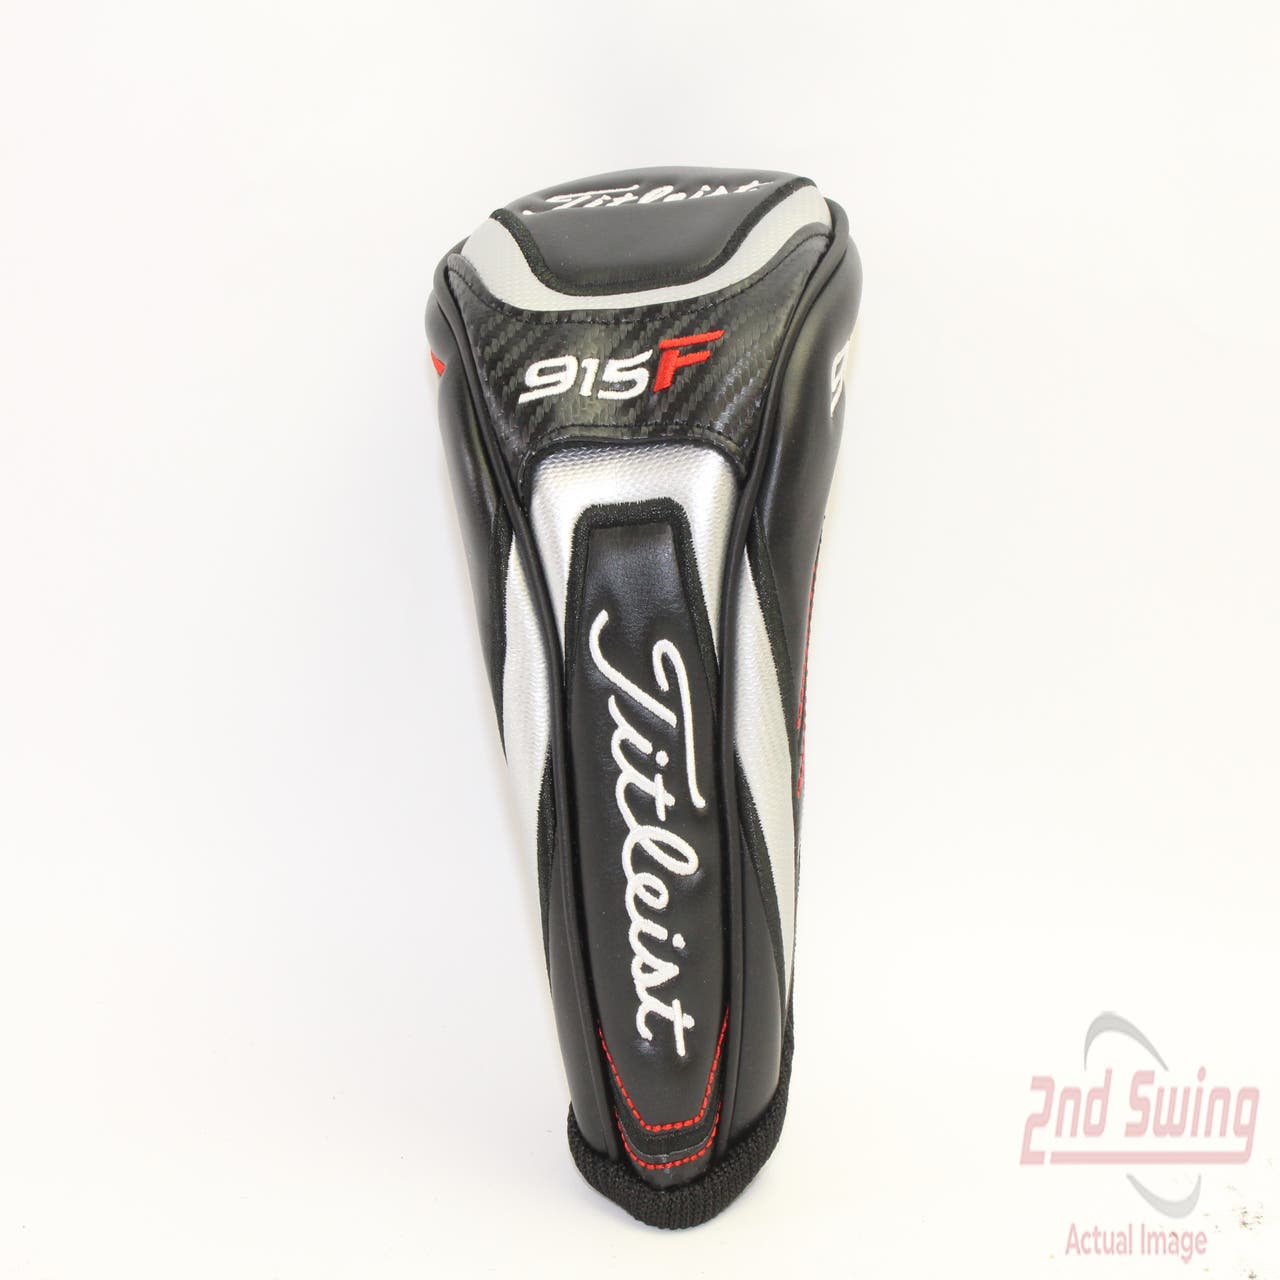 Golf Head Covers, Titleist Headcovers